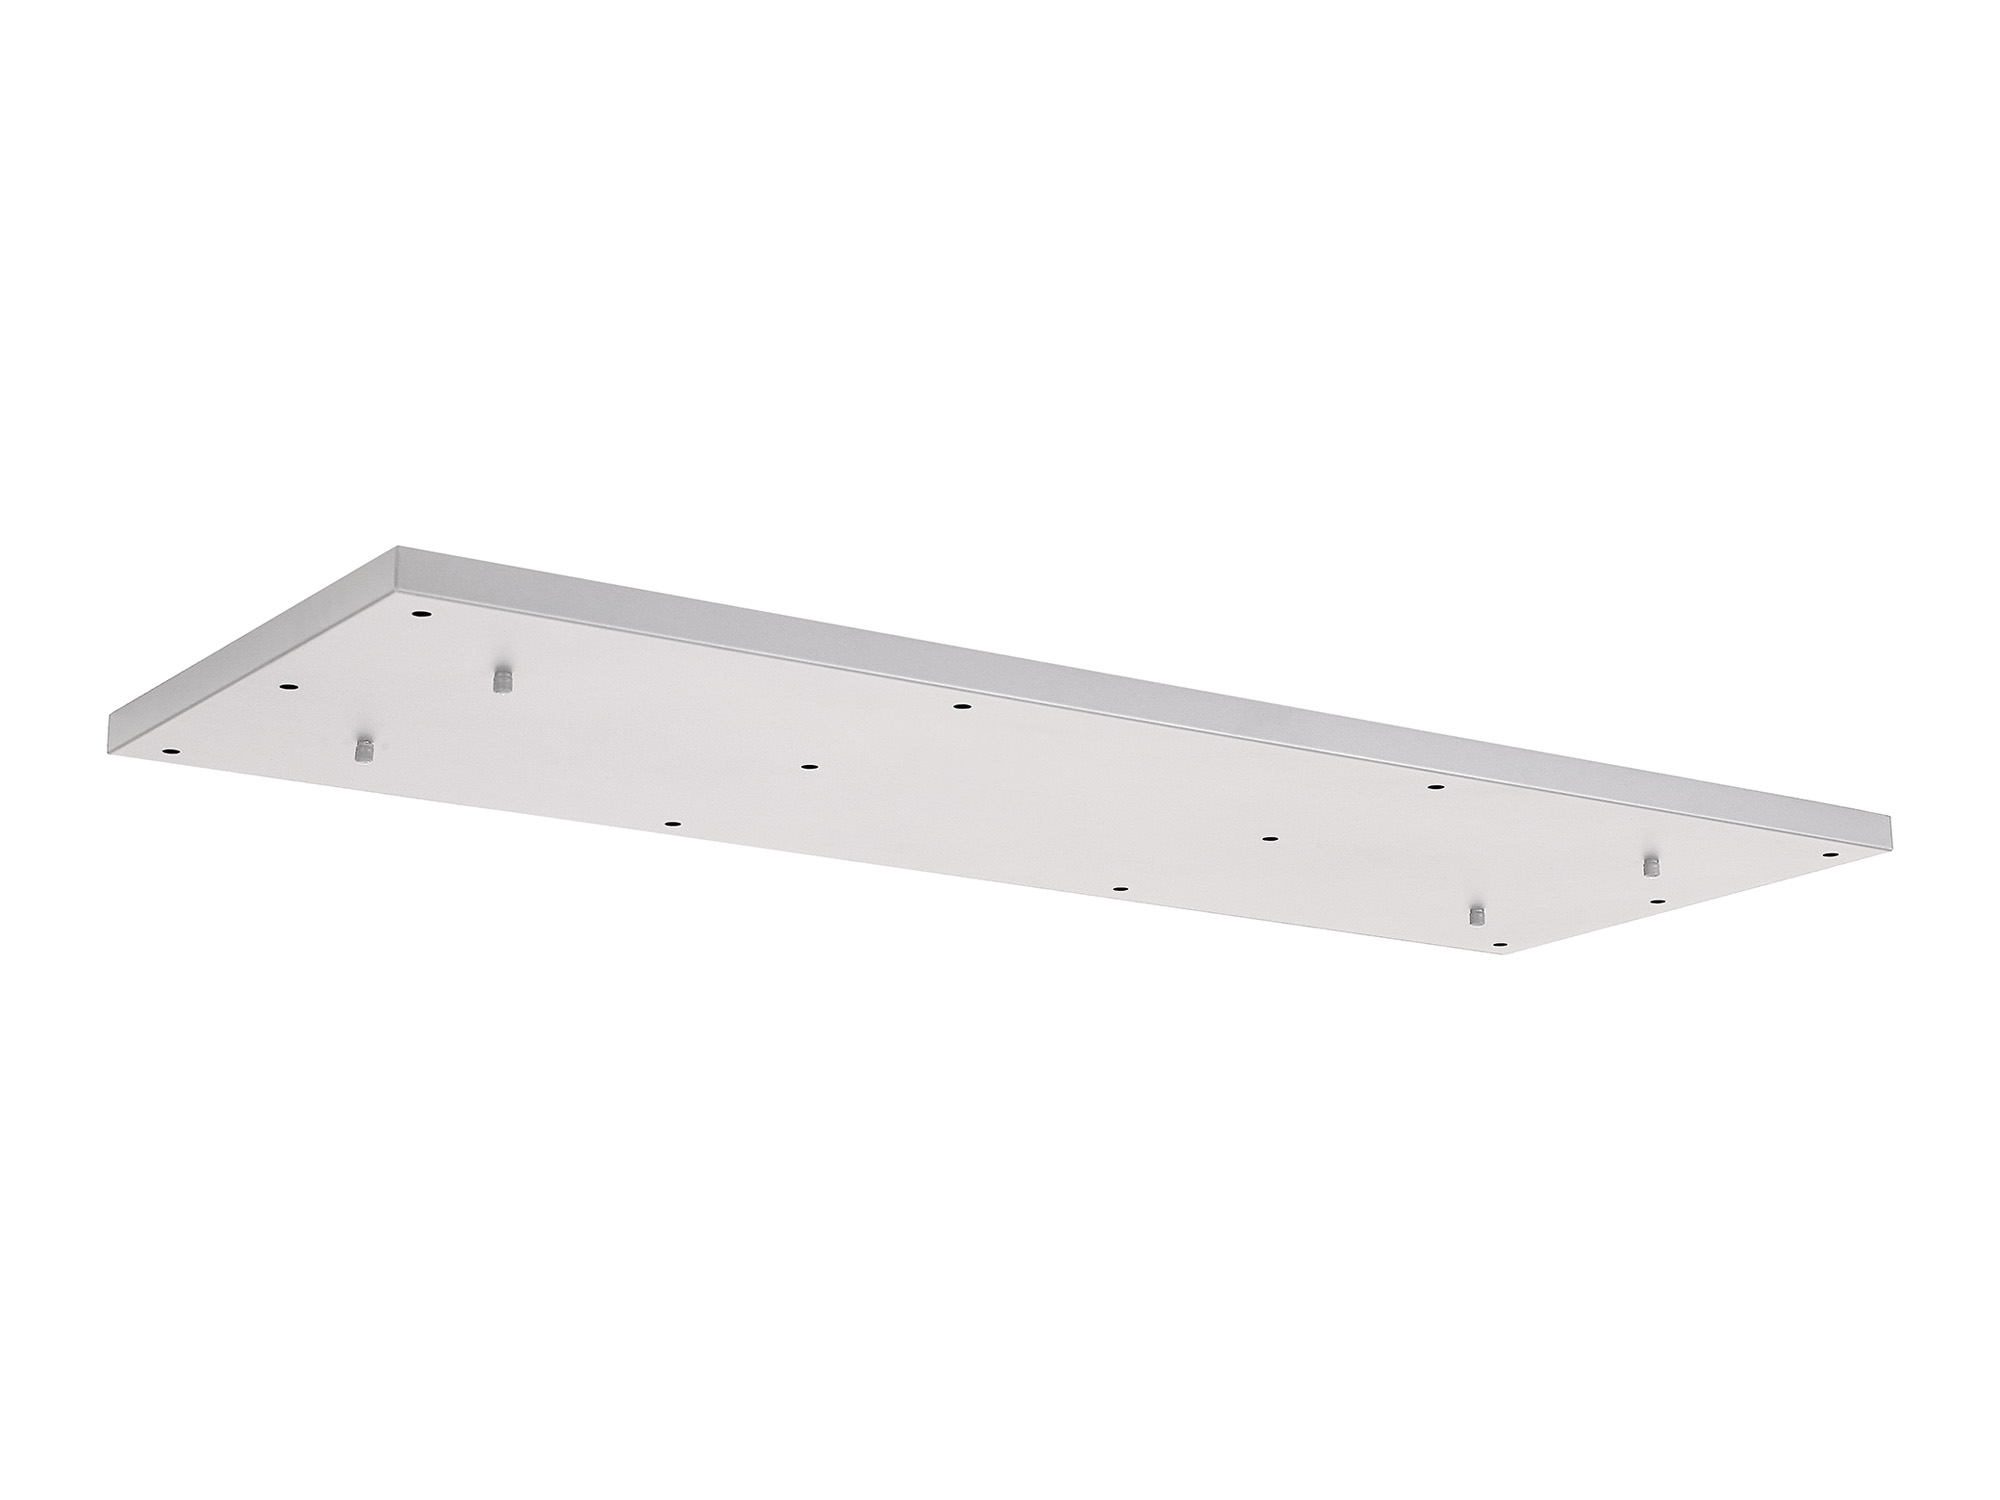 D0889WH  Hayes 12 Hole 1100mm x 400mm Ceiling Plate White